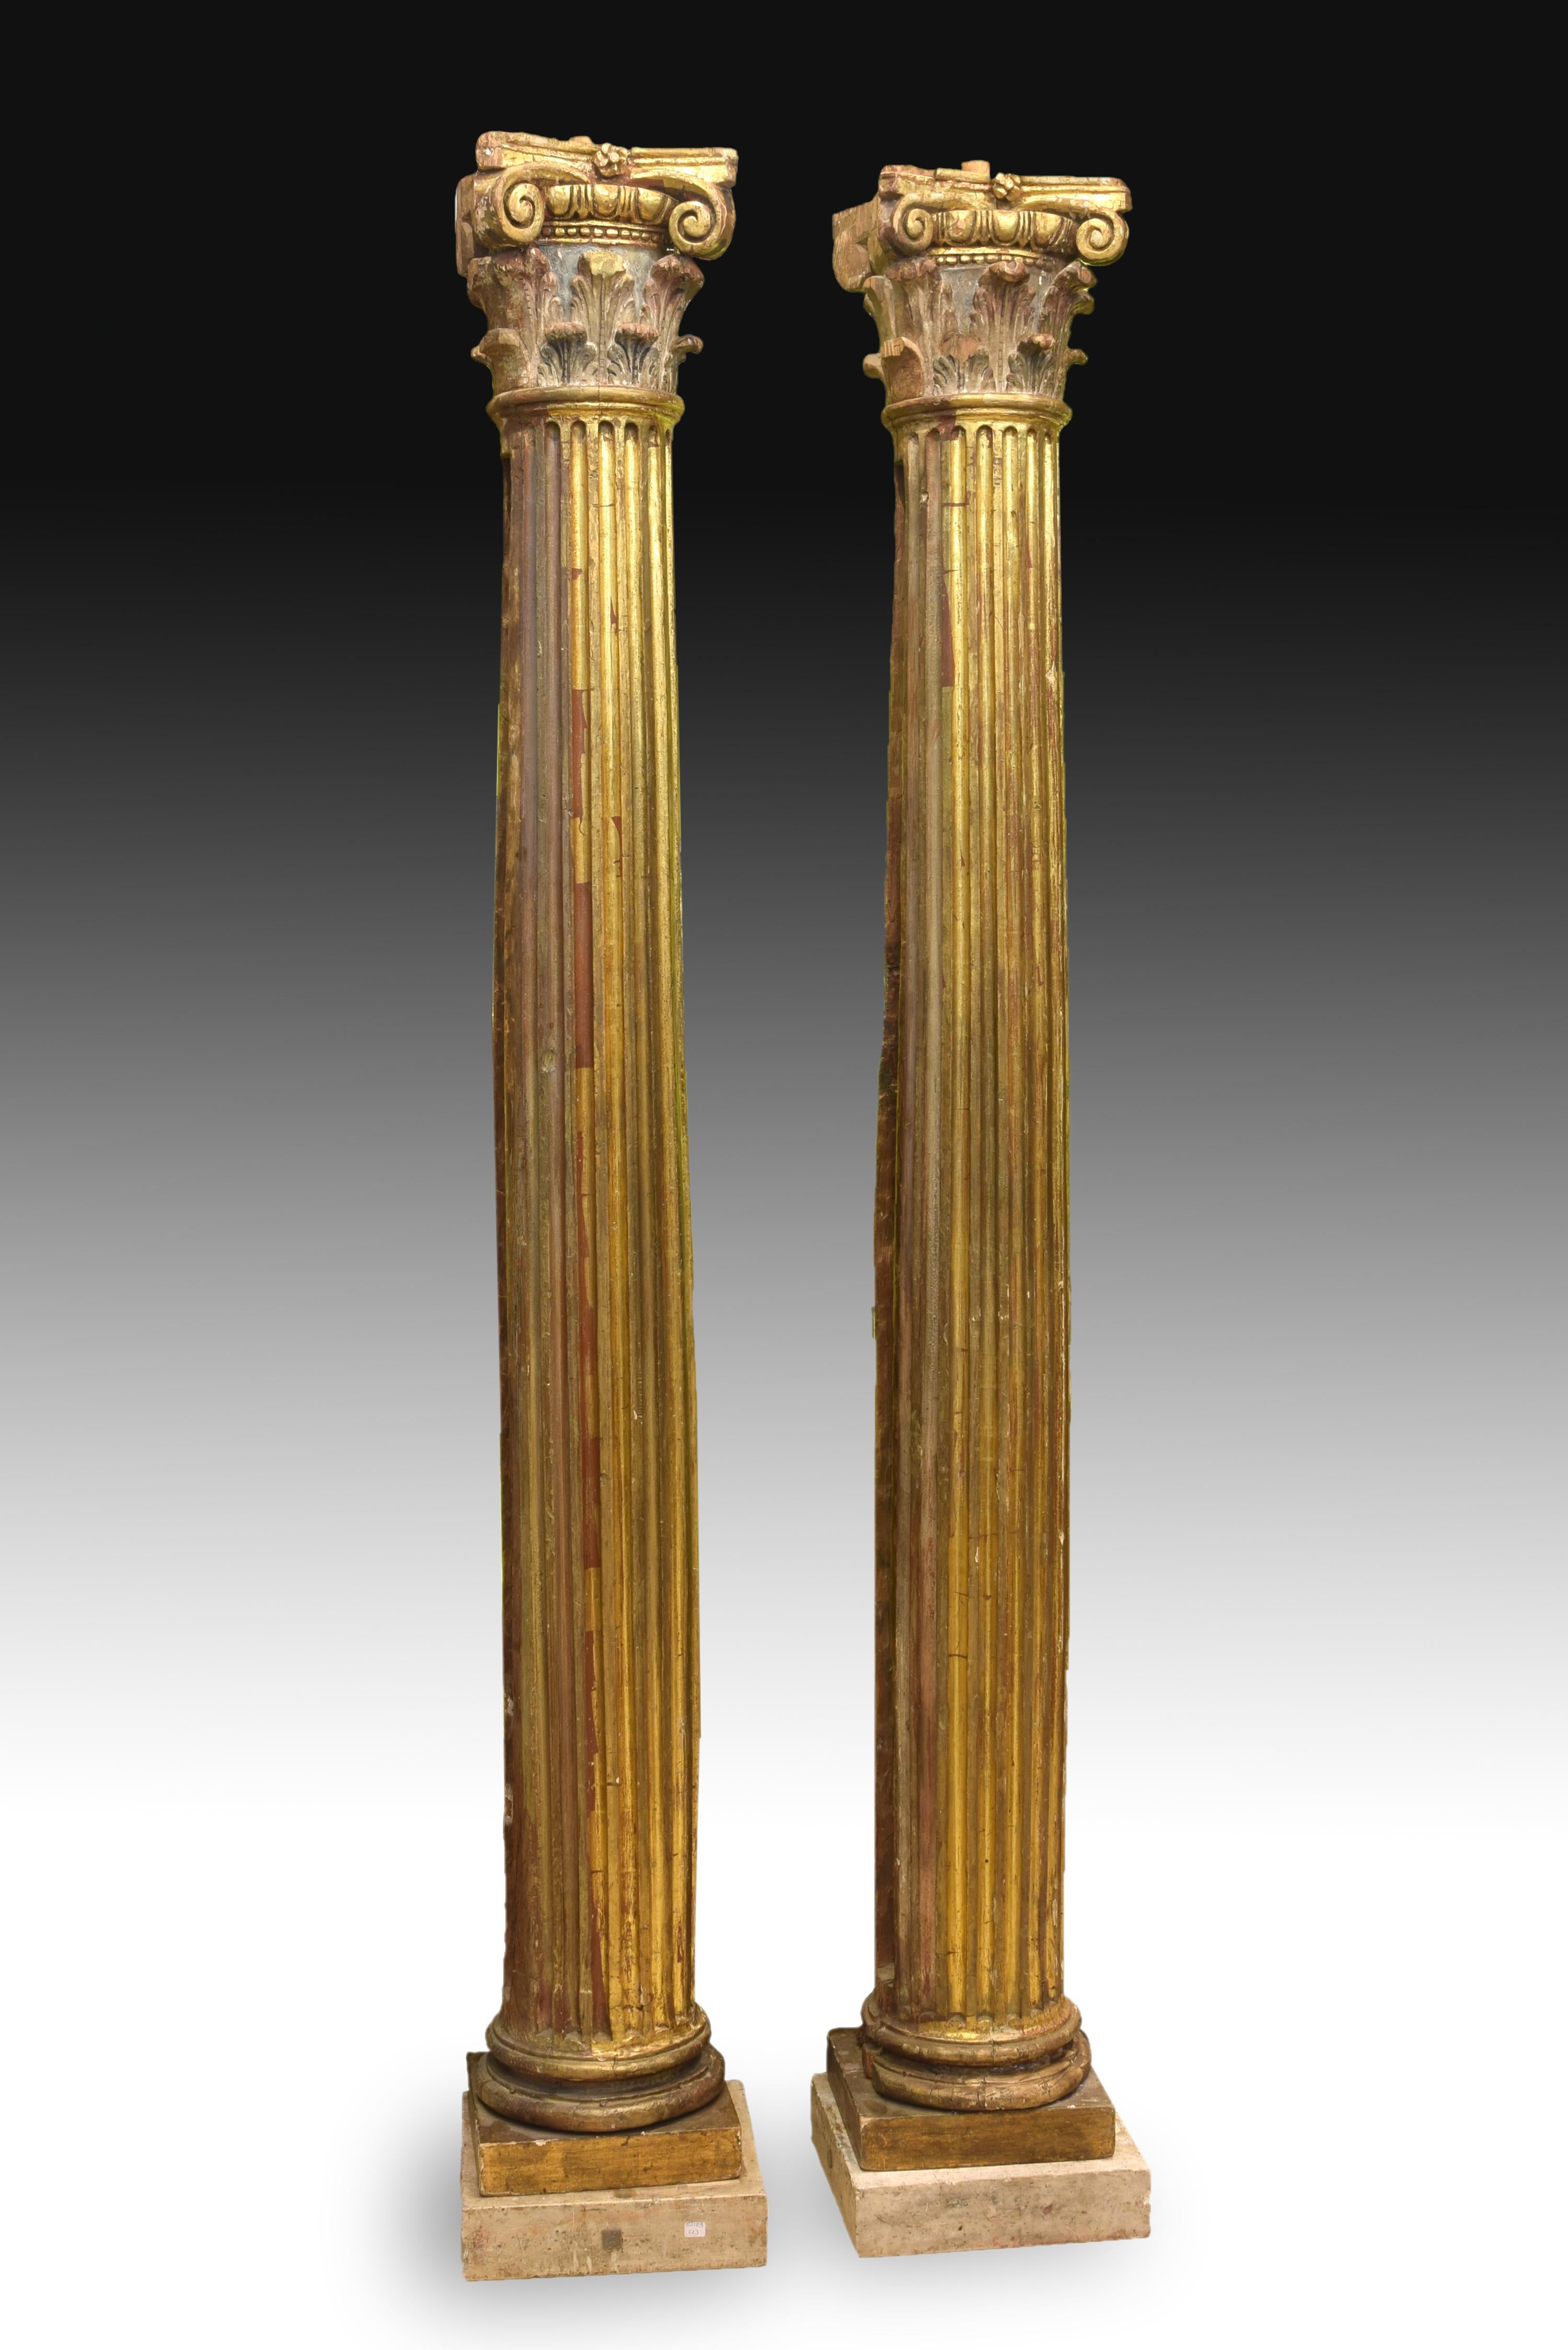 Baroque Pair of Columns, Polychromed and Gilt Walnut Wood, 17th Century